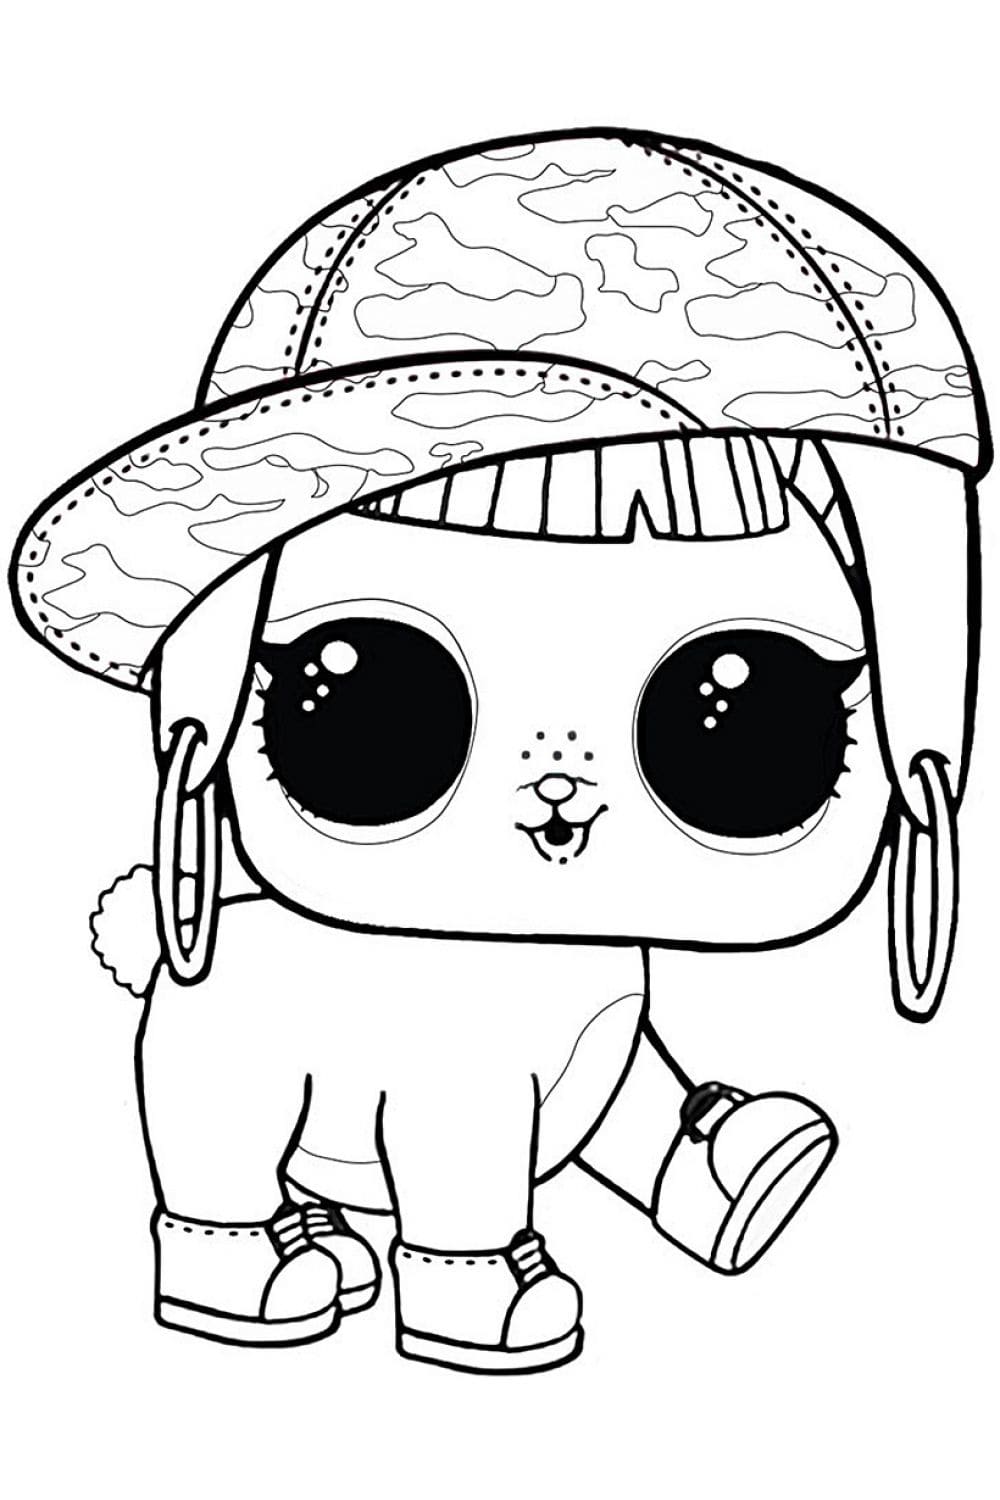 Purrfect Spike Lol Pets Coloring Page - Free Printable Coloring Pages ...